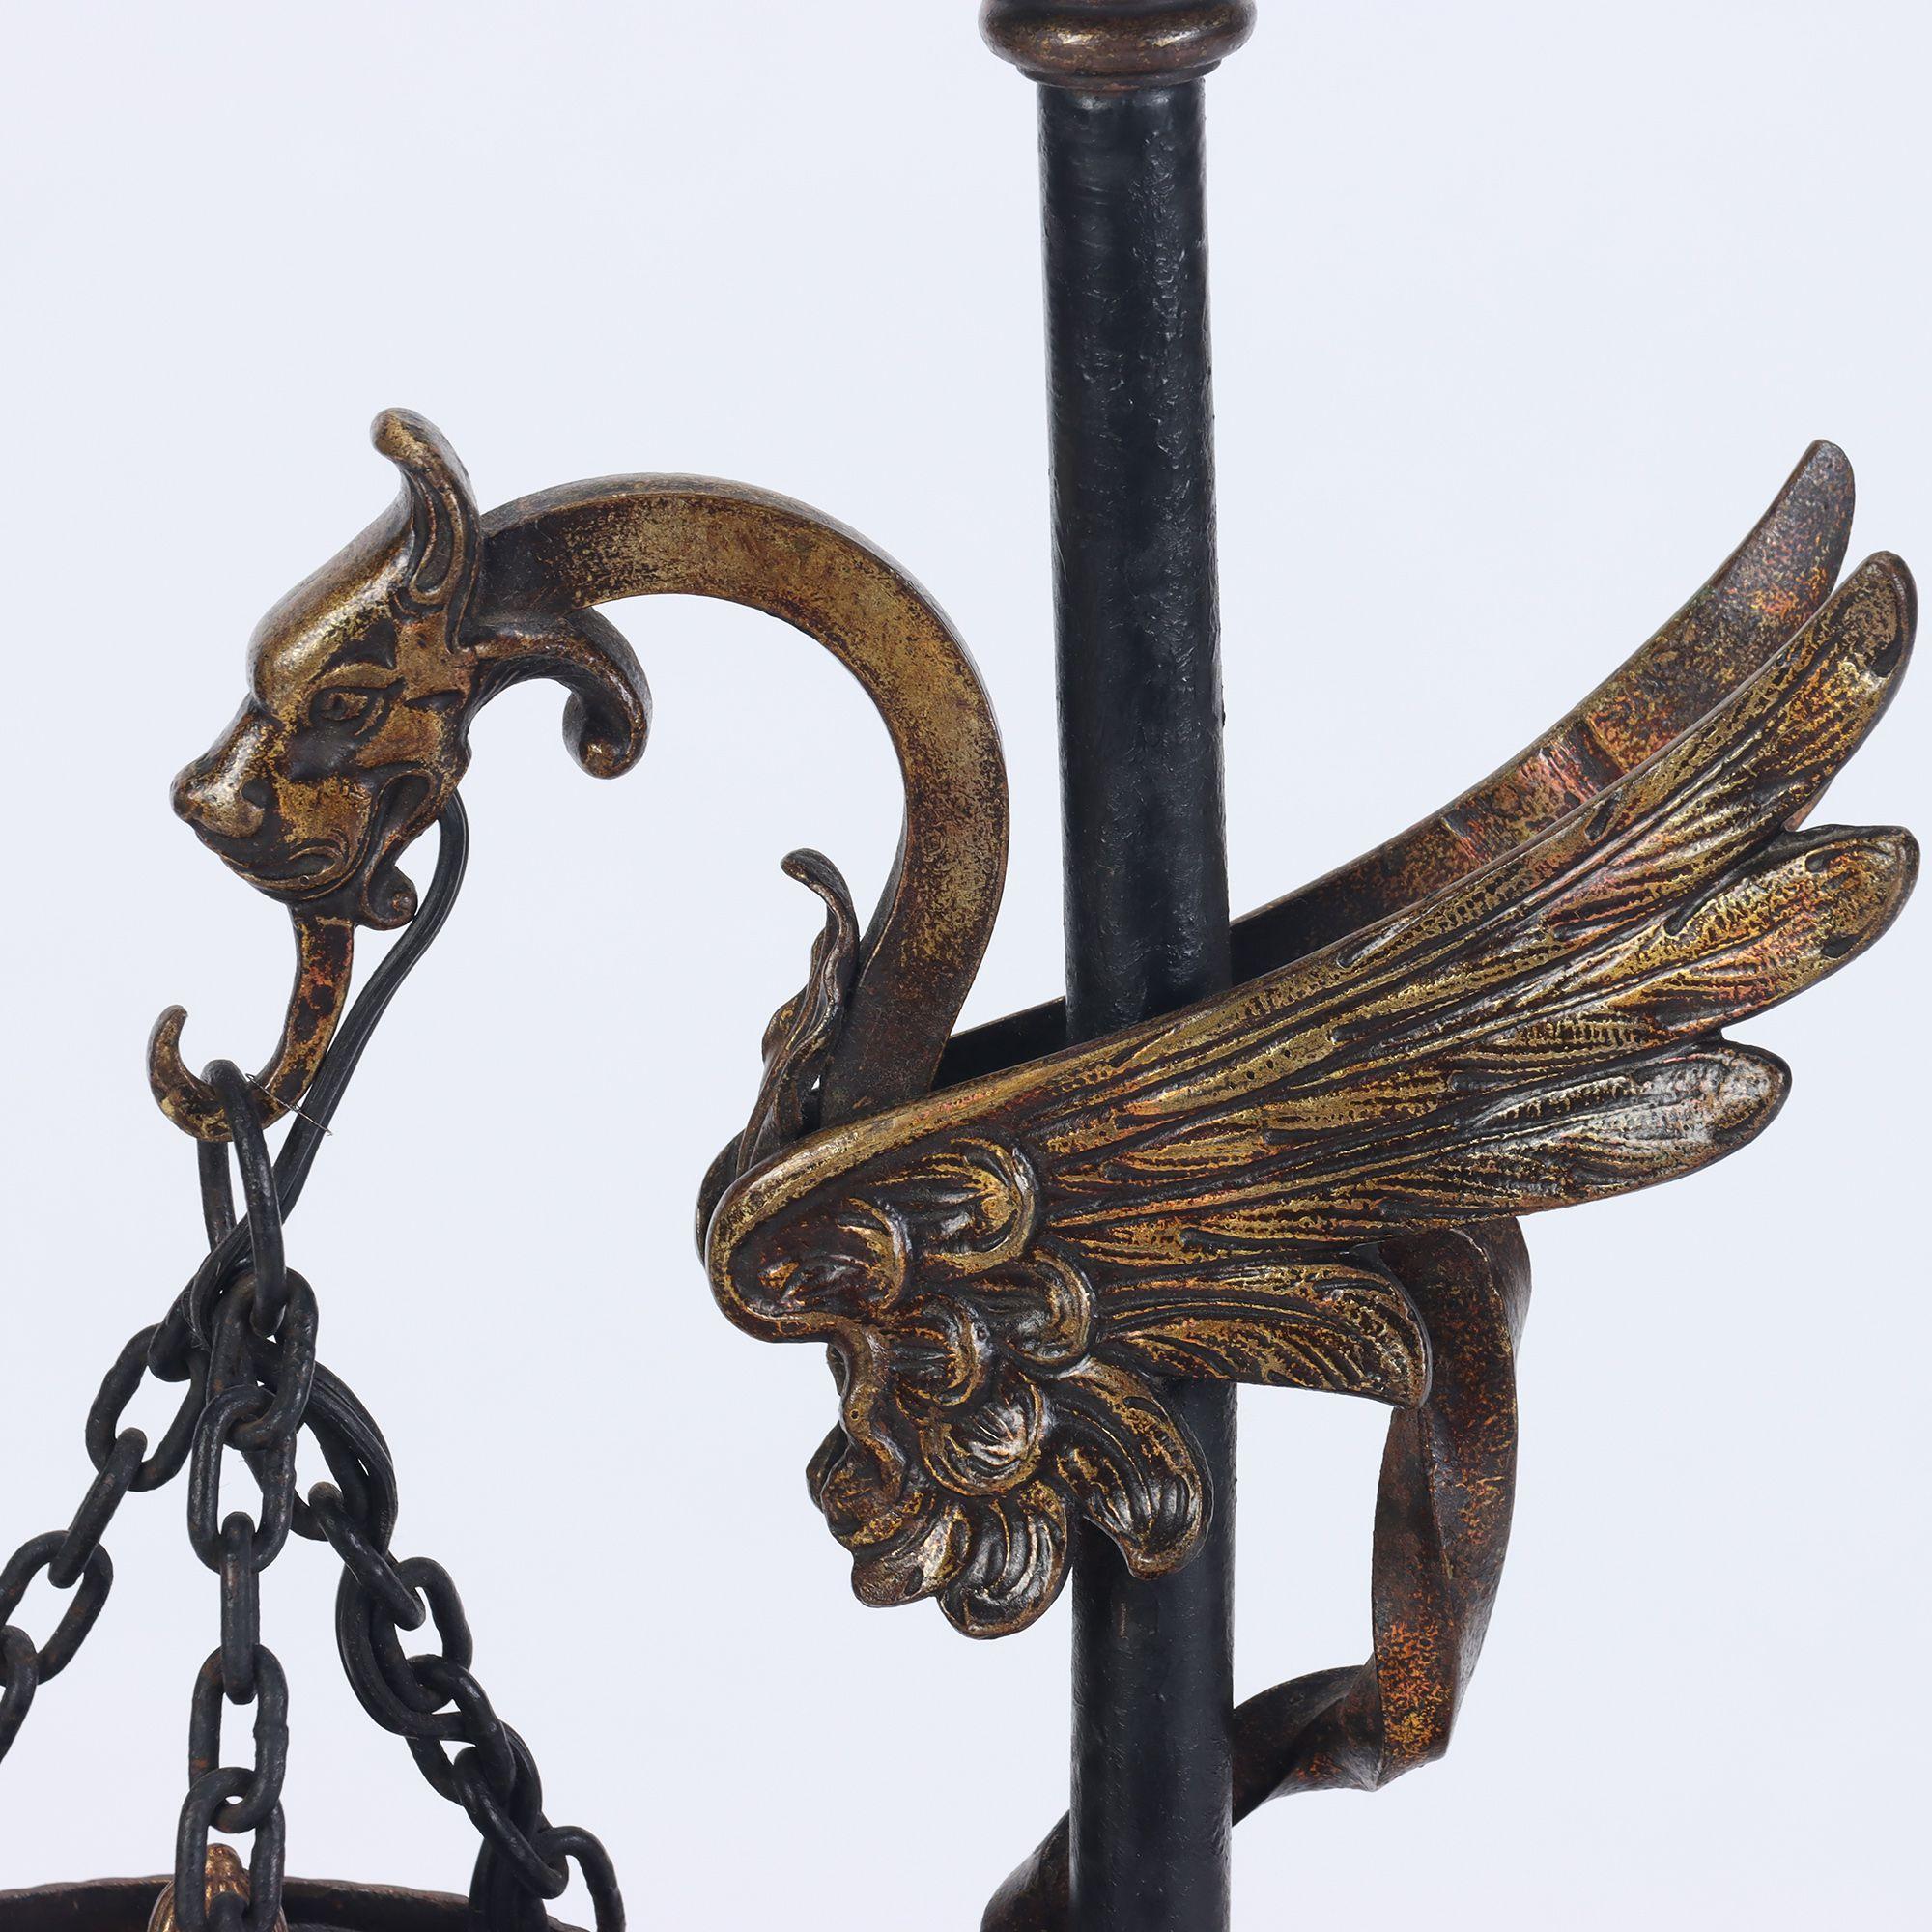 20th Century Iron and Gilt Decorated Floor Lamp with Winged Griffin Decoration C 1900